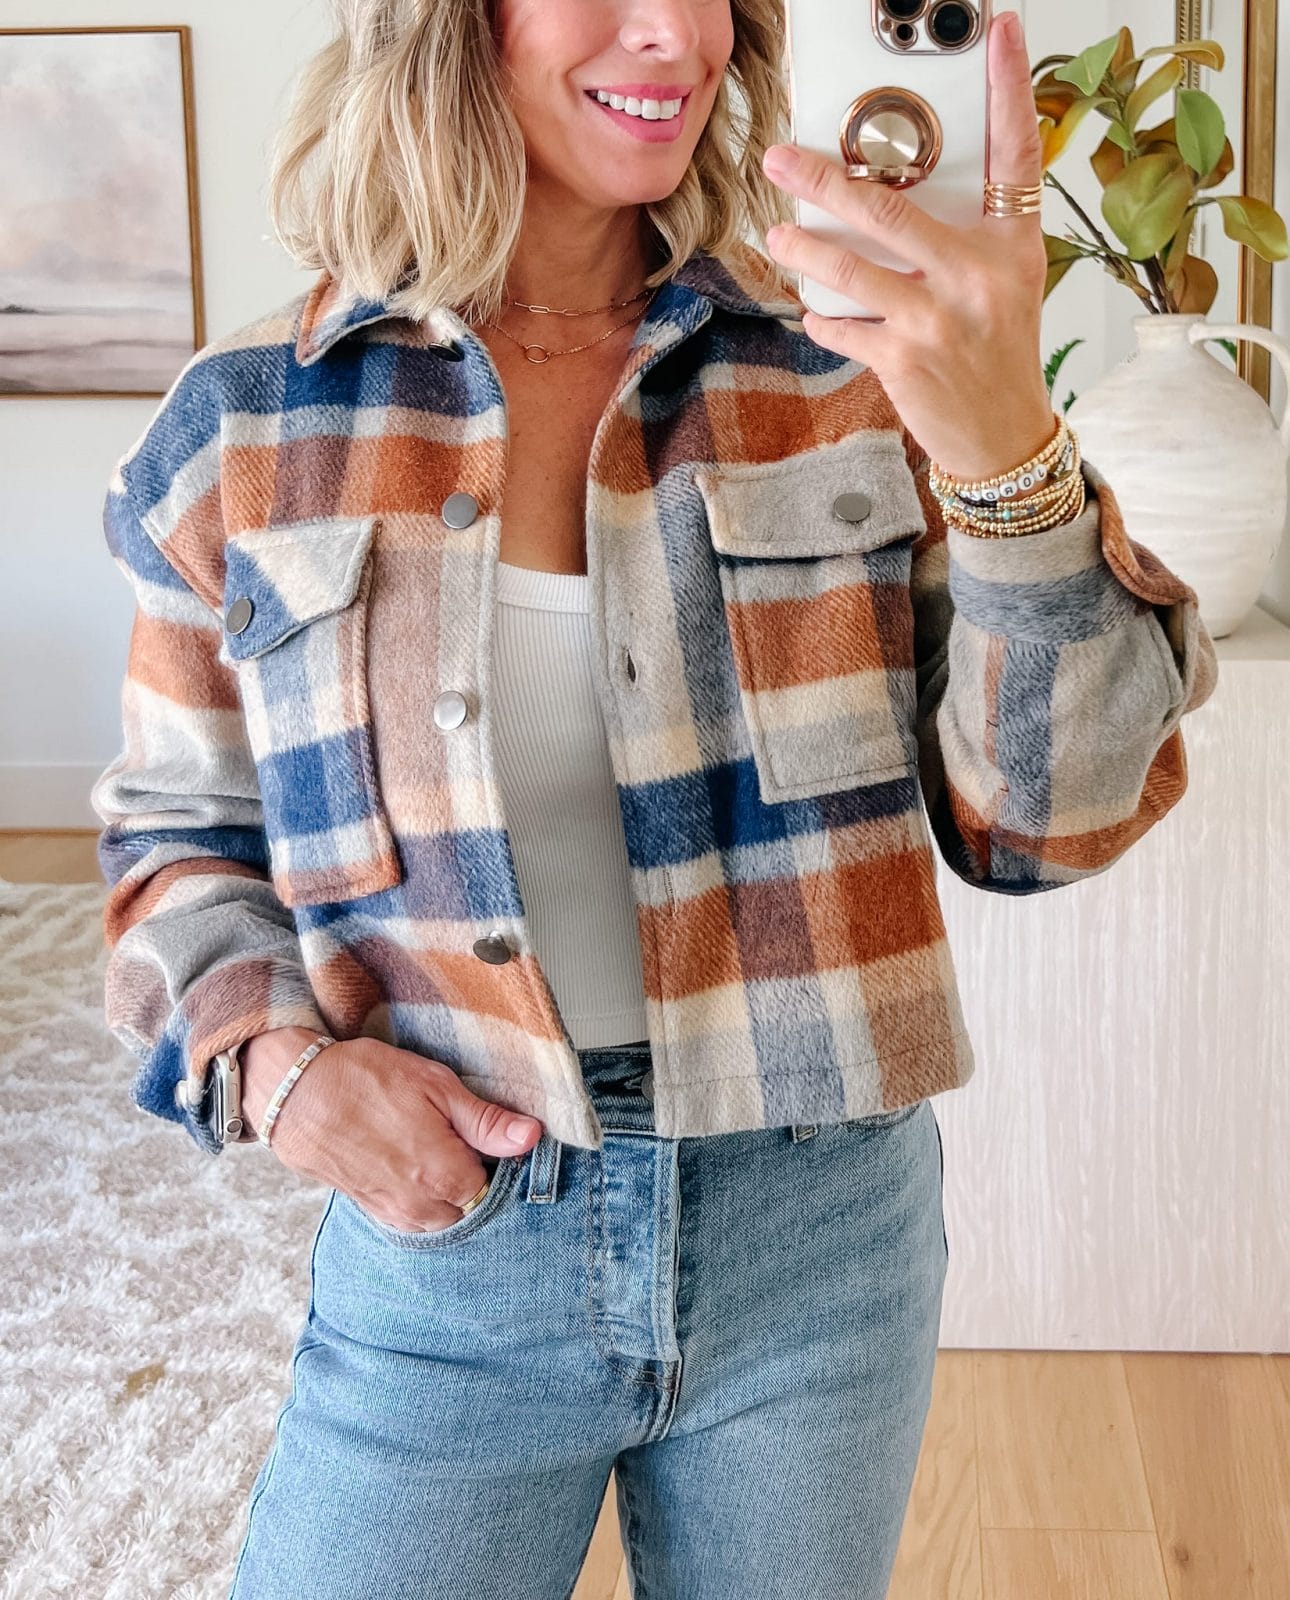 Plaid Cropped Jacket, Jeans, Booties